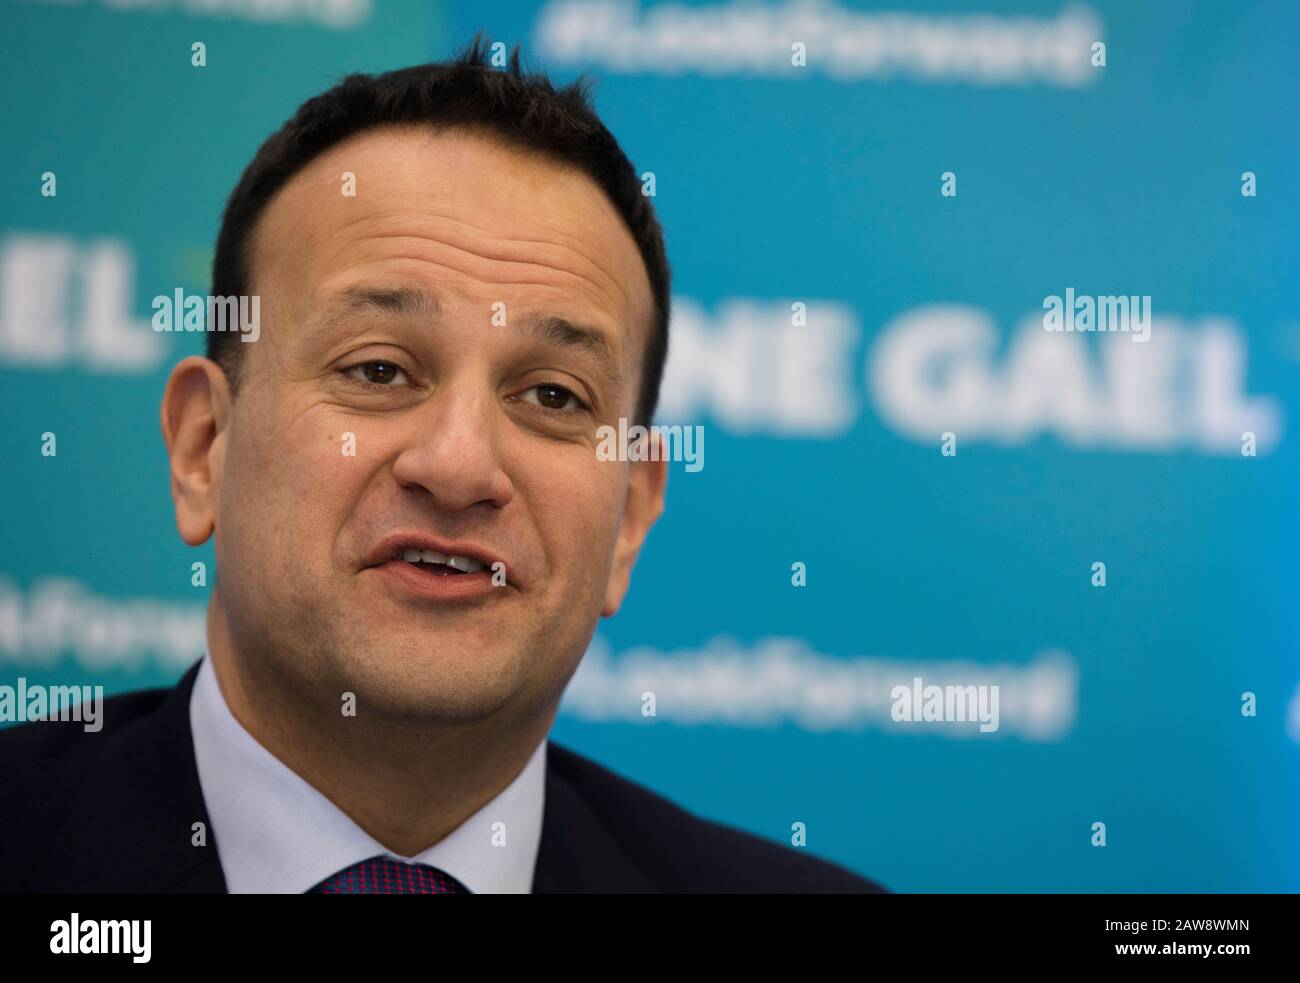 Carlow Town, Ireland. 6th Feb 2020. Irish General Election 2020. Taoiseach (Prime Minister) Leo Varadkar at the final main Fine Gael press conference of their General Election Campaign in the Institute of Technology, Carlow Town. Photo: Eamonn Farrell/RollingNews.ie/Alamy Live News Credit: RollingNews.ie/Alamy Live News Stock Photo